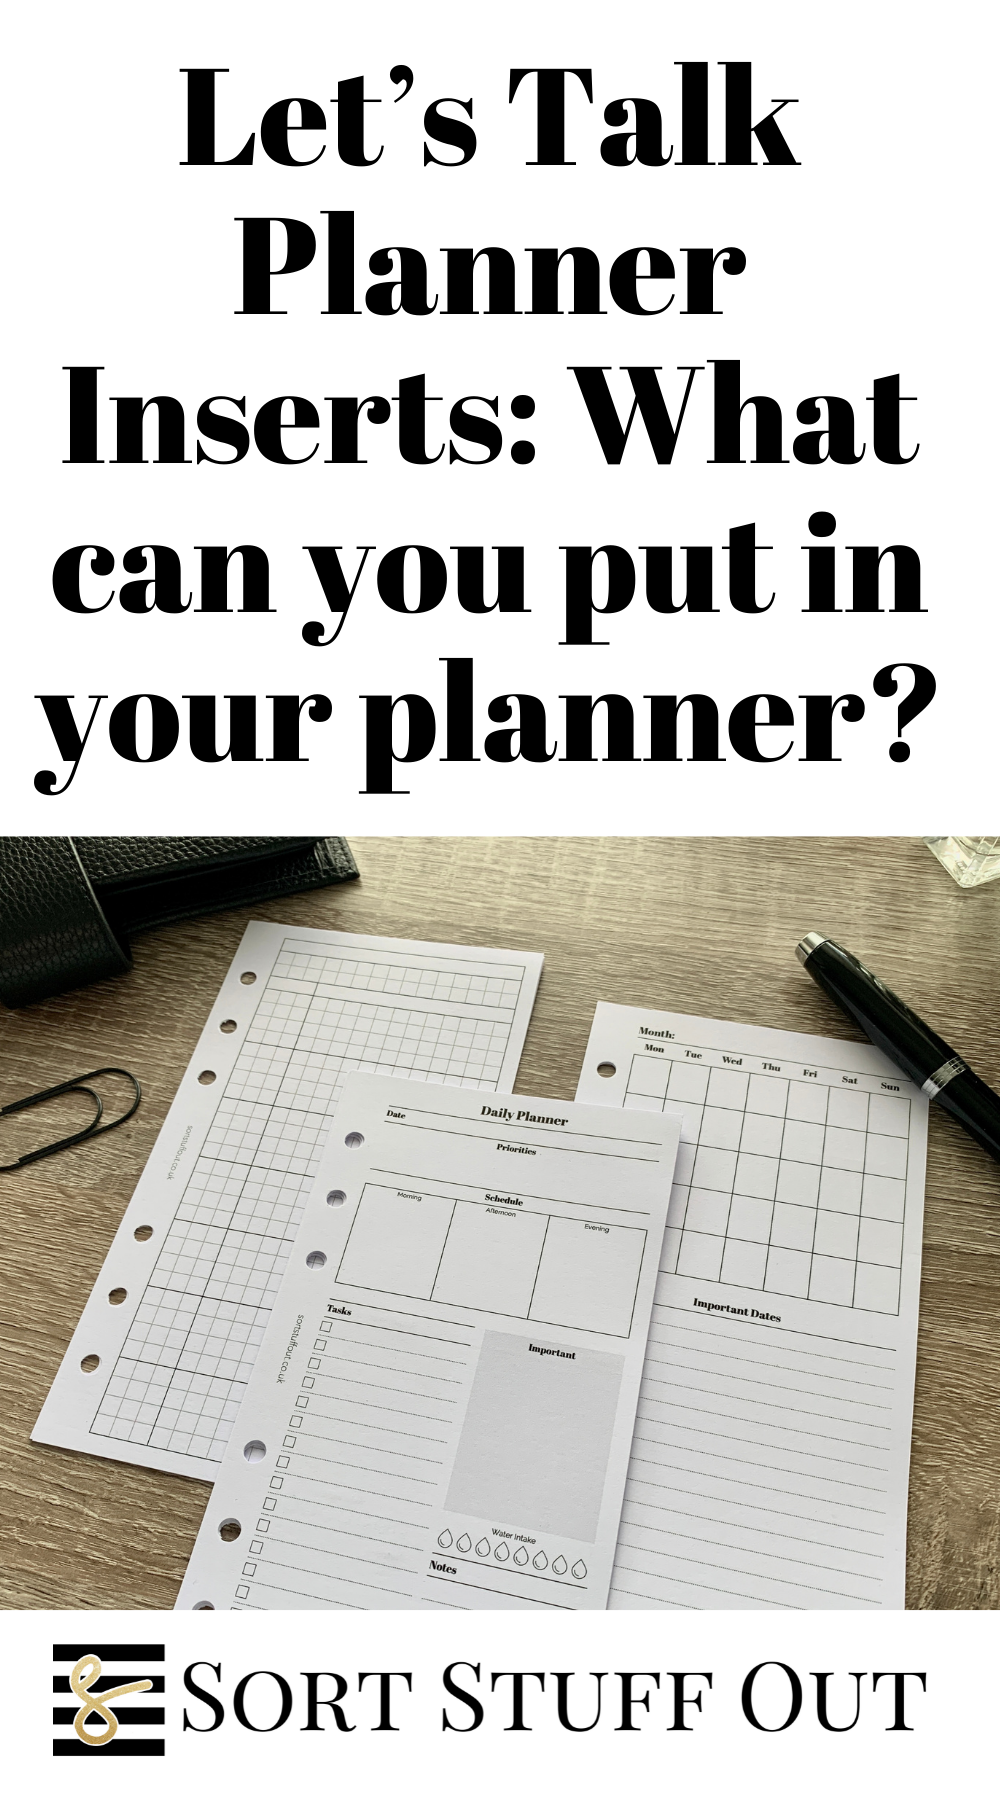 Let’s Talk Planner Inserts: What can you put in your planner?